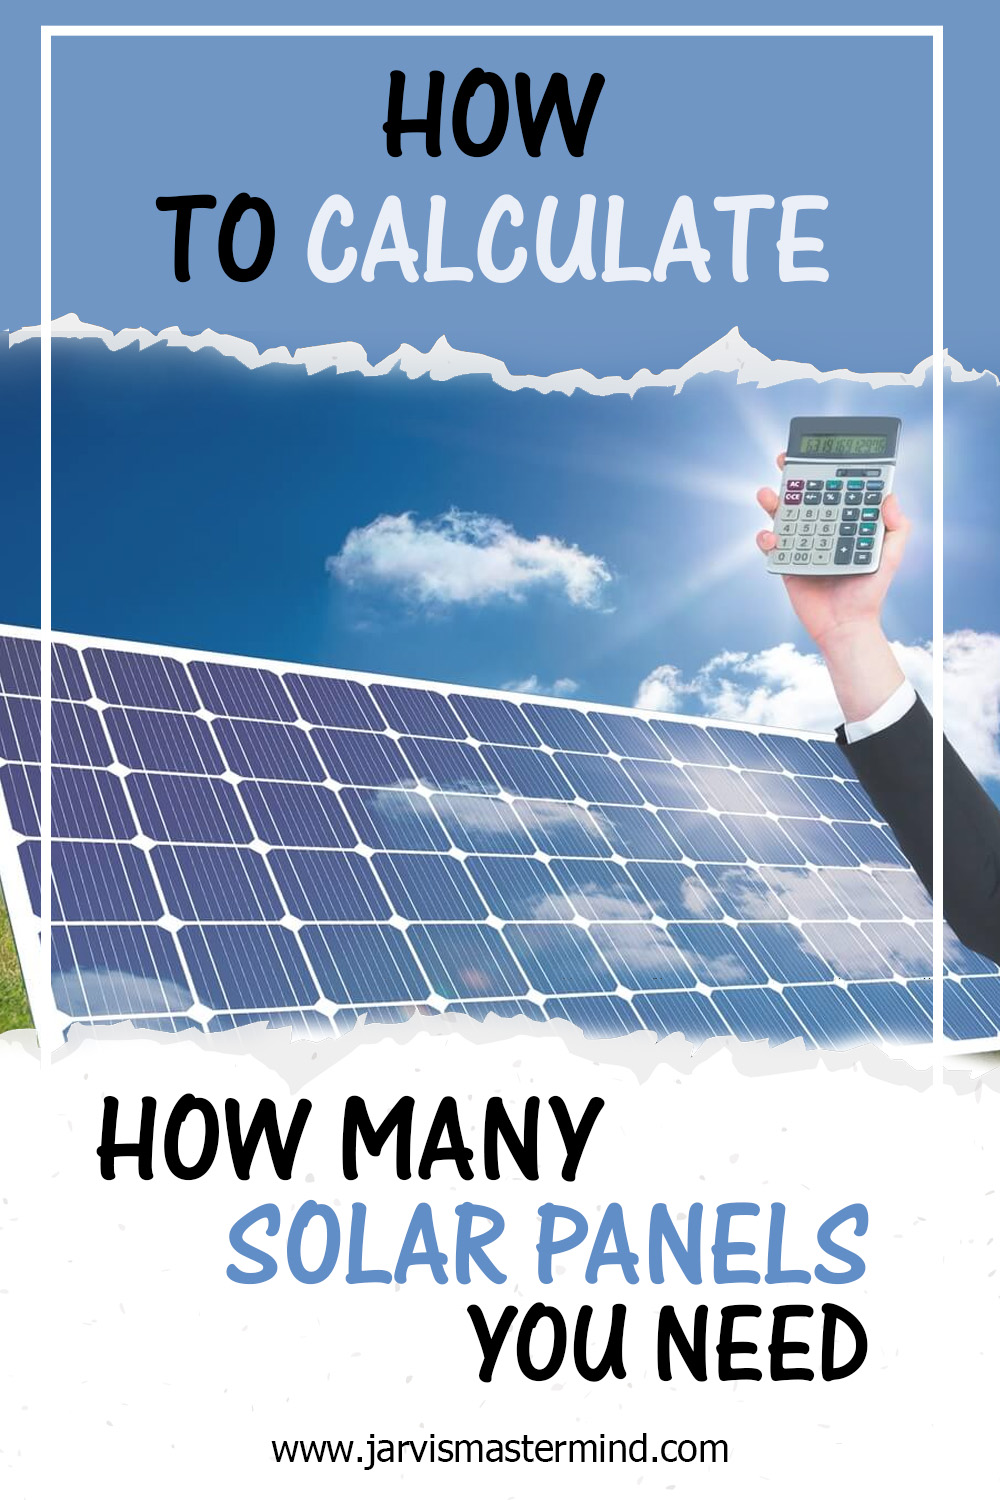 How to Calculate How Many Solar Panels You Need - Jarvis Mastermind